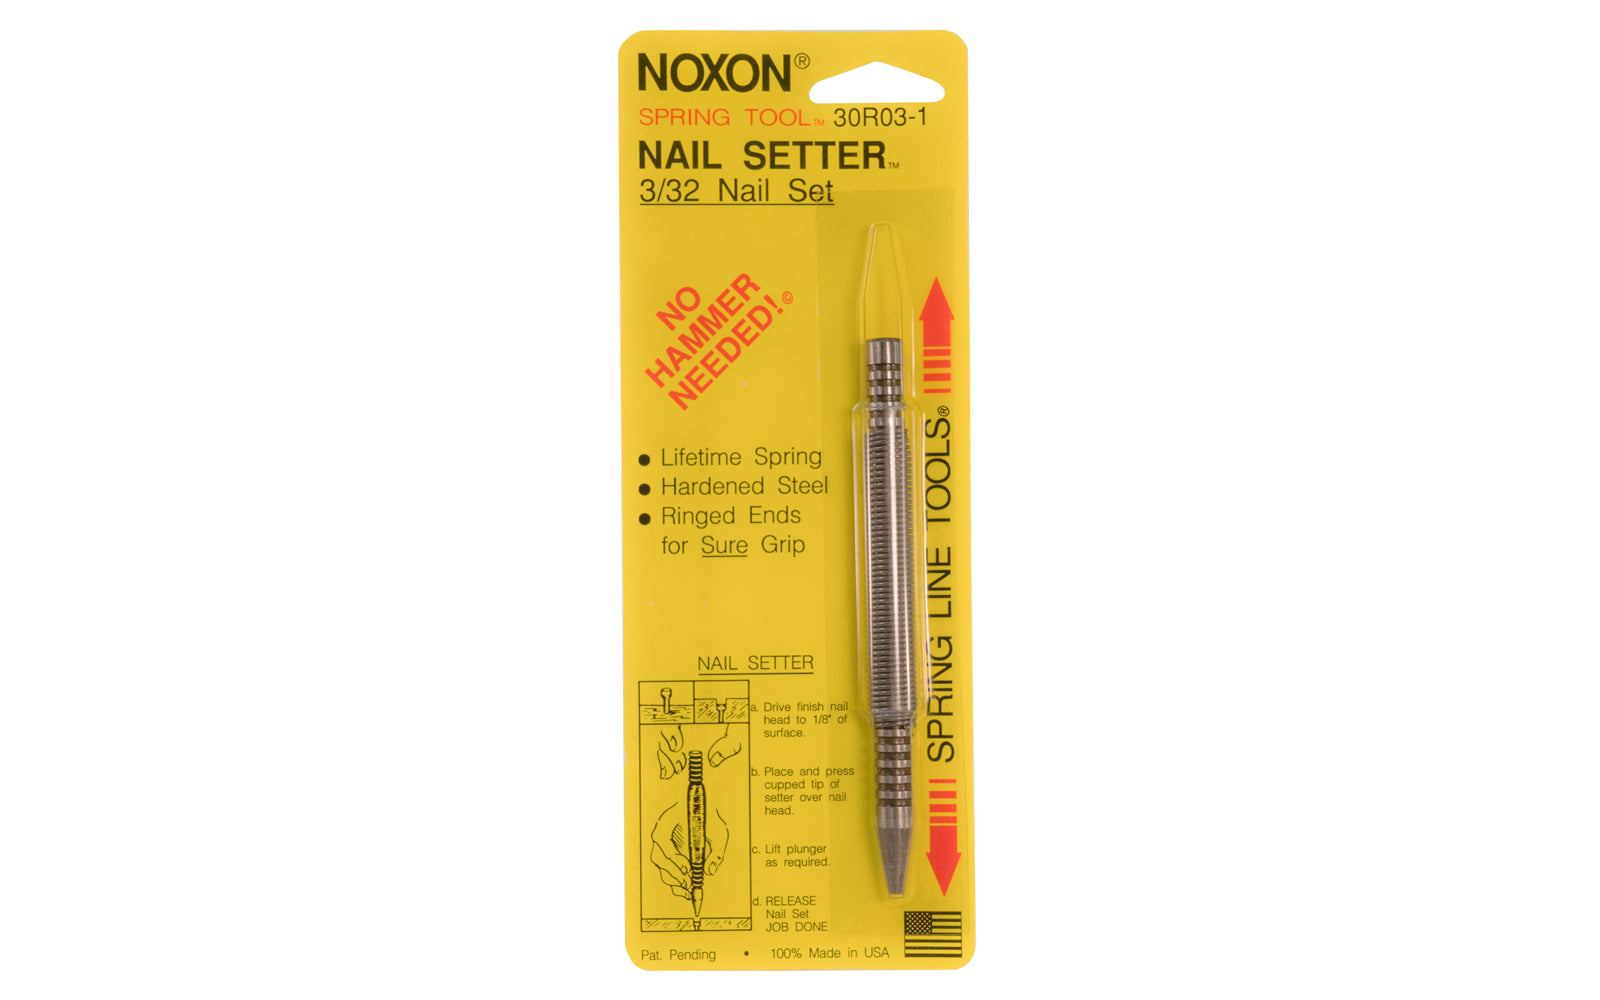 Noxon "Spring Tool" 3/32" Nail Set. This spring tool nail setter is a tool to drive finish nails below the surface of wood. Choose cup diameter which matches nail head. This 3/32" nail setter is best suited for #8 and #10 finish nails. No hammer is needed, but you may use one if you wish. Make certain to strike the end squarely with hammer.  Made in USA.